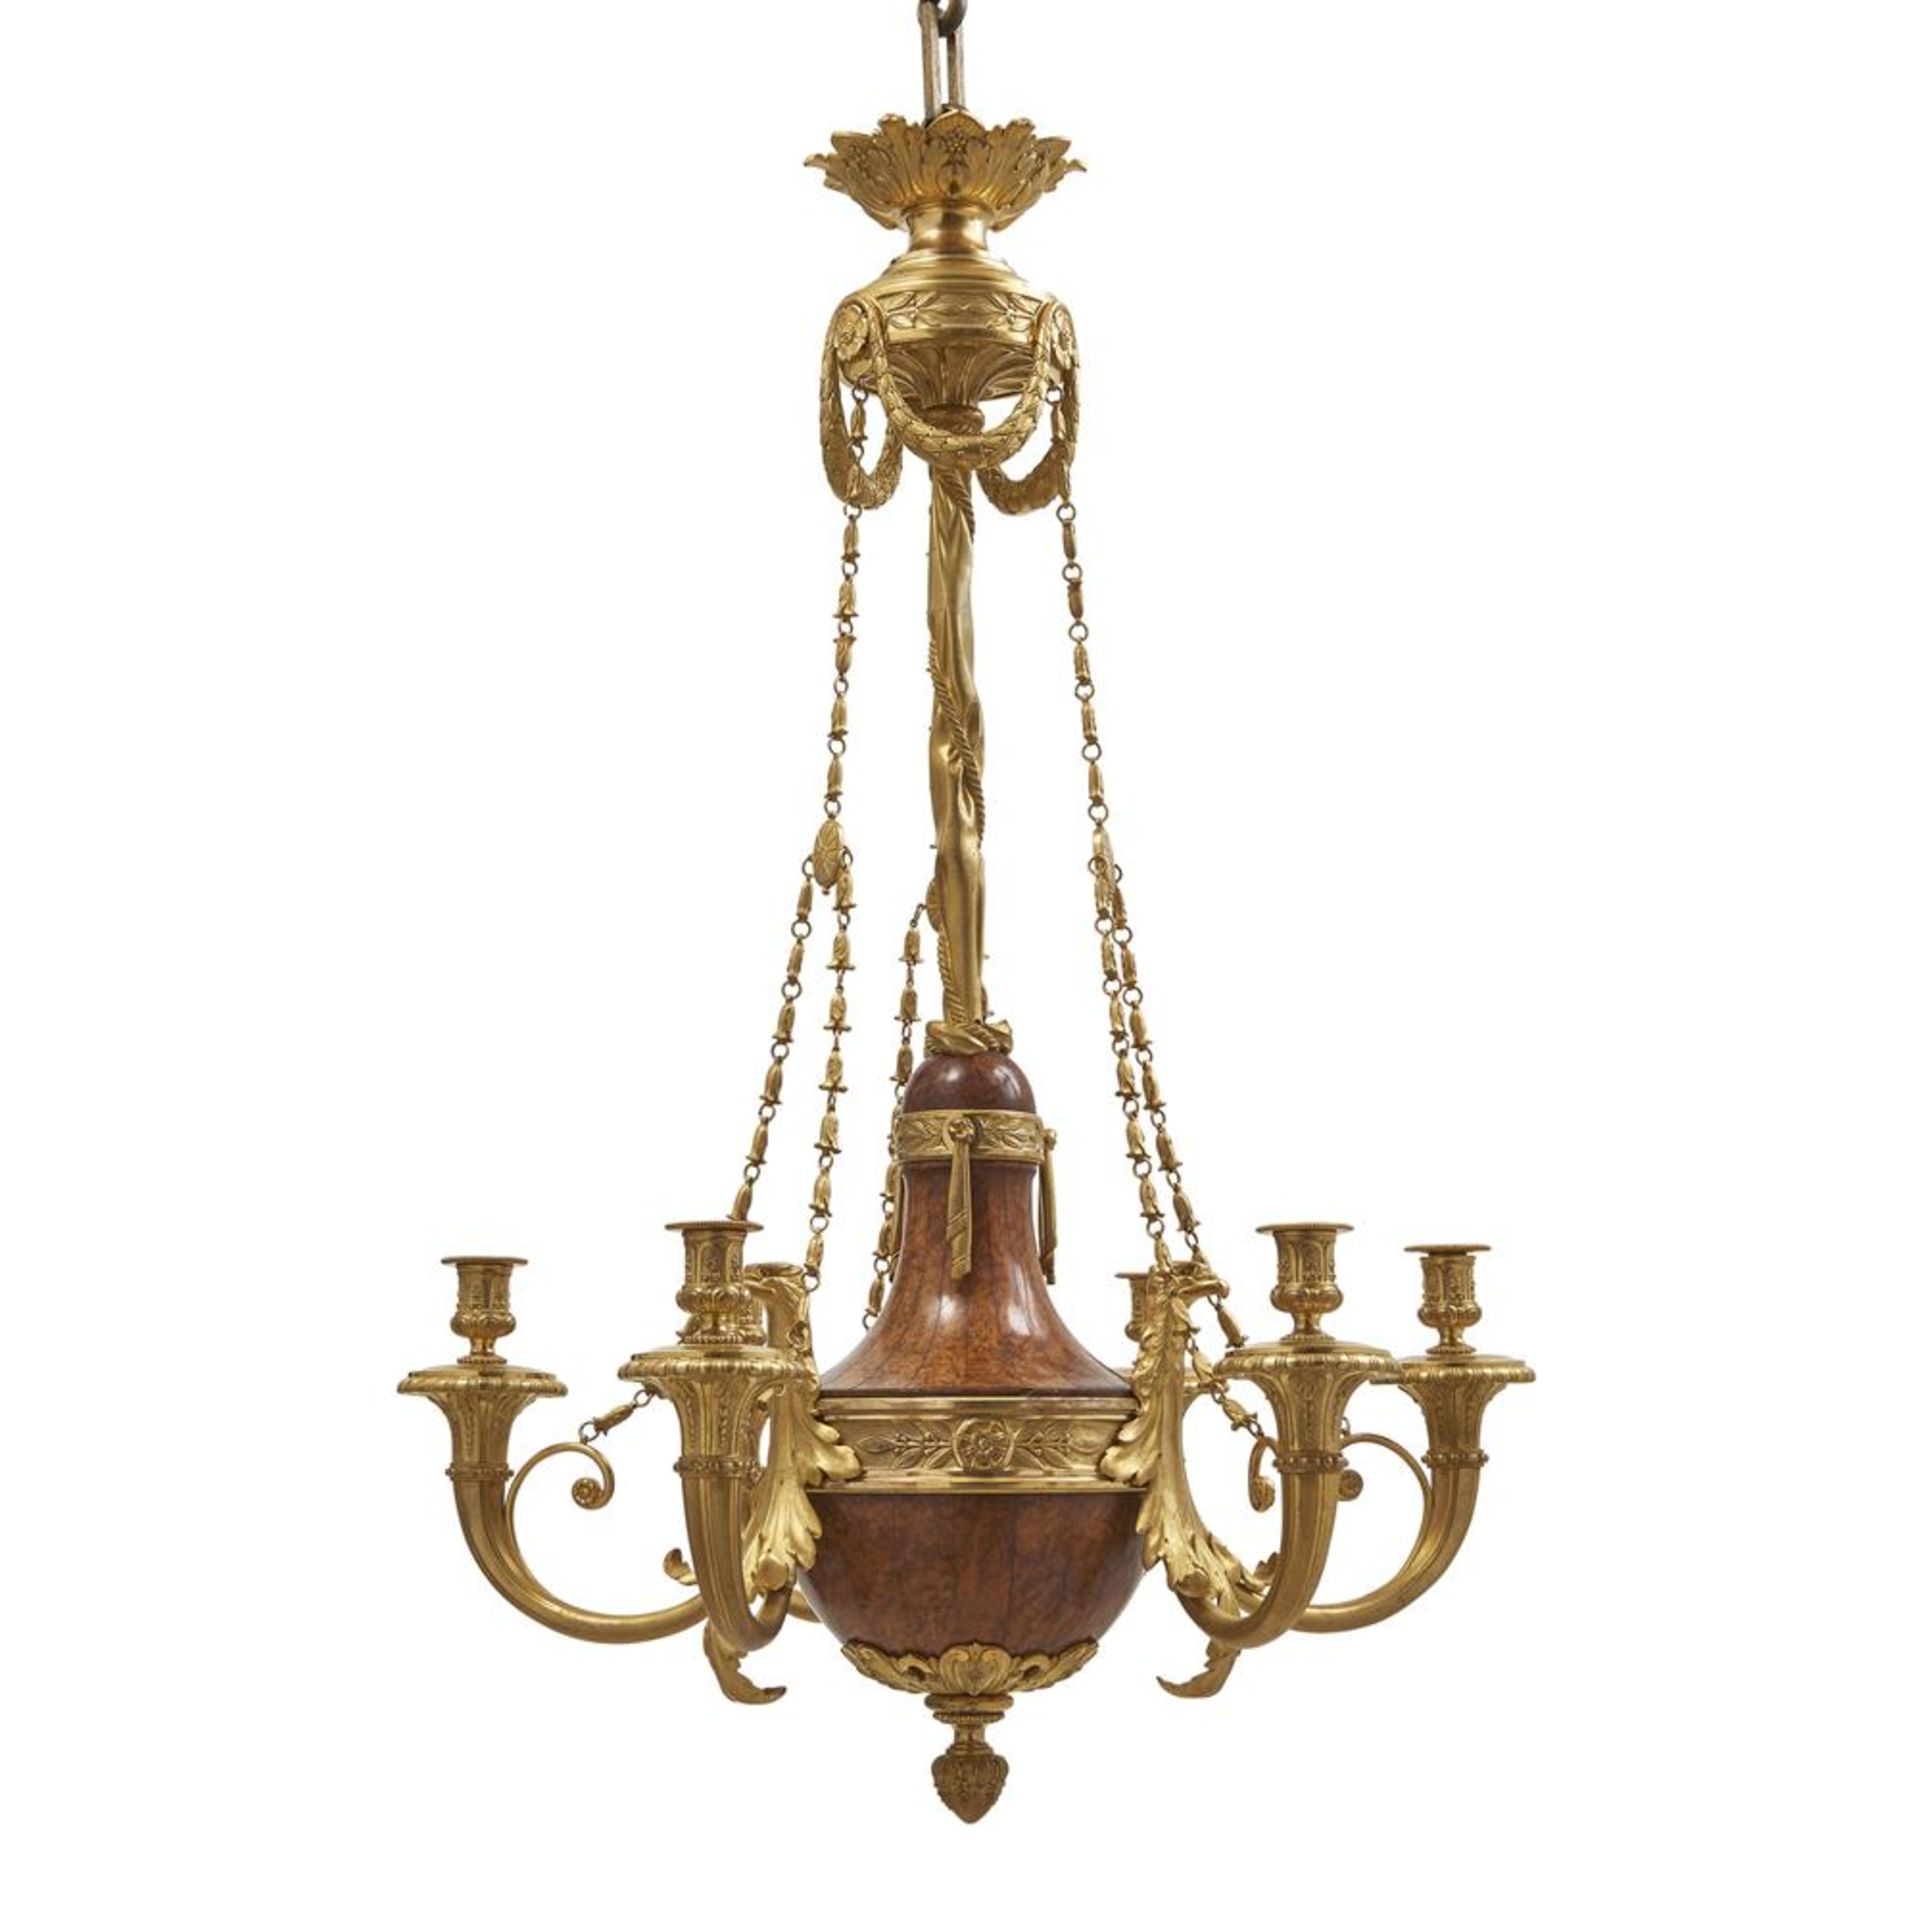 AN UNUSUAL BALTIC OR FRENCH EMPIRE STYLE GILT BRONZE AND BURR WALNUT SIX LIGHT CHANDELIER